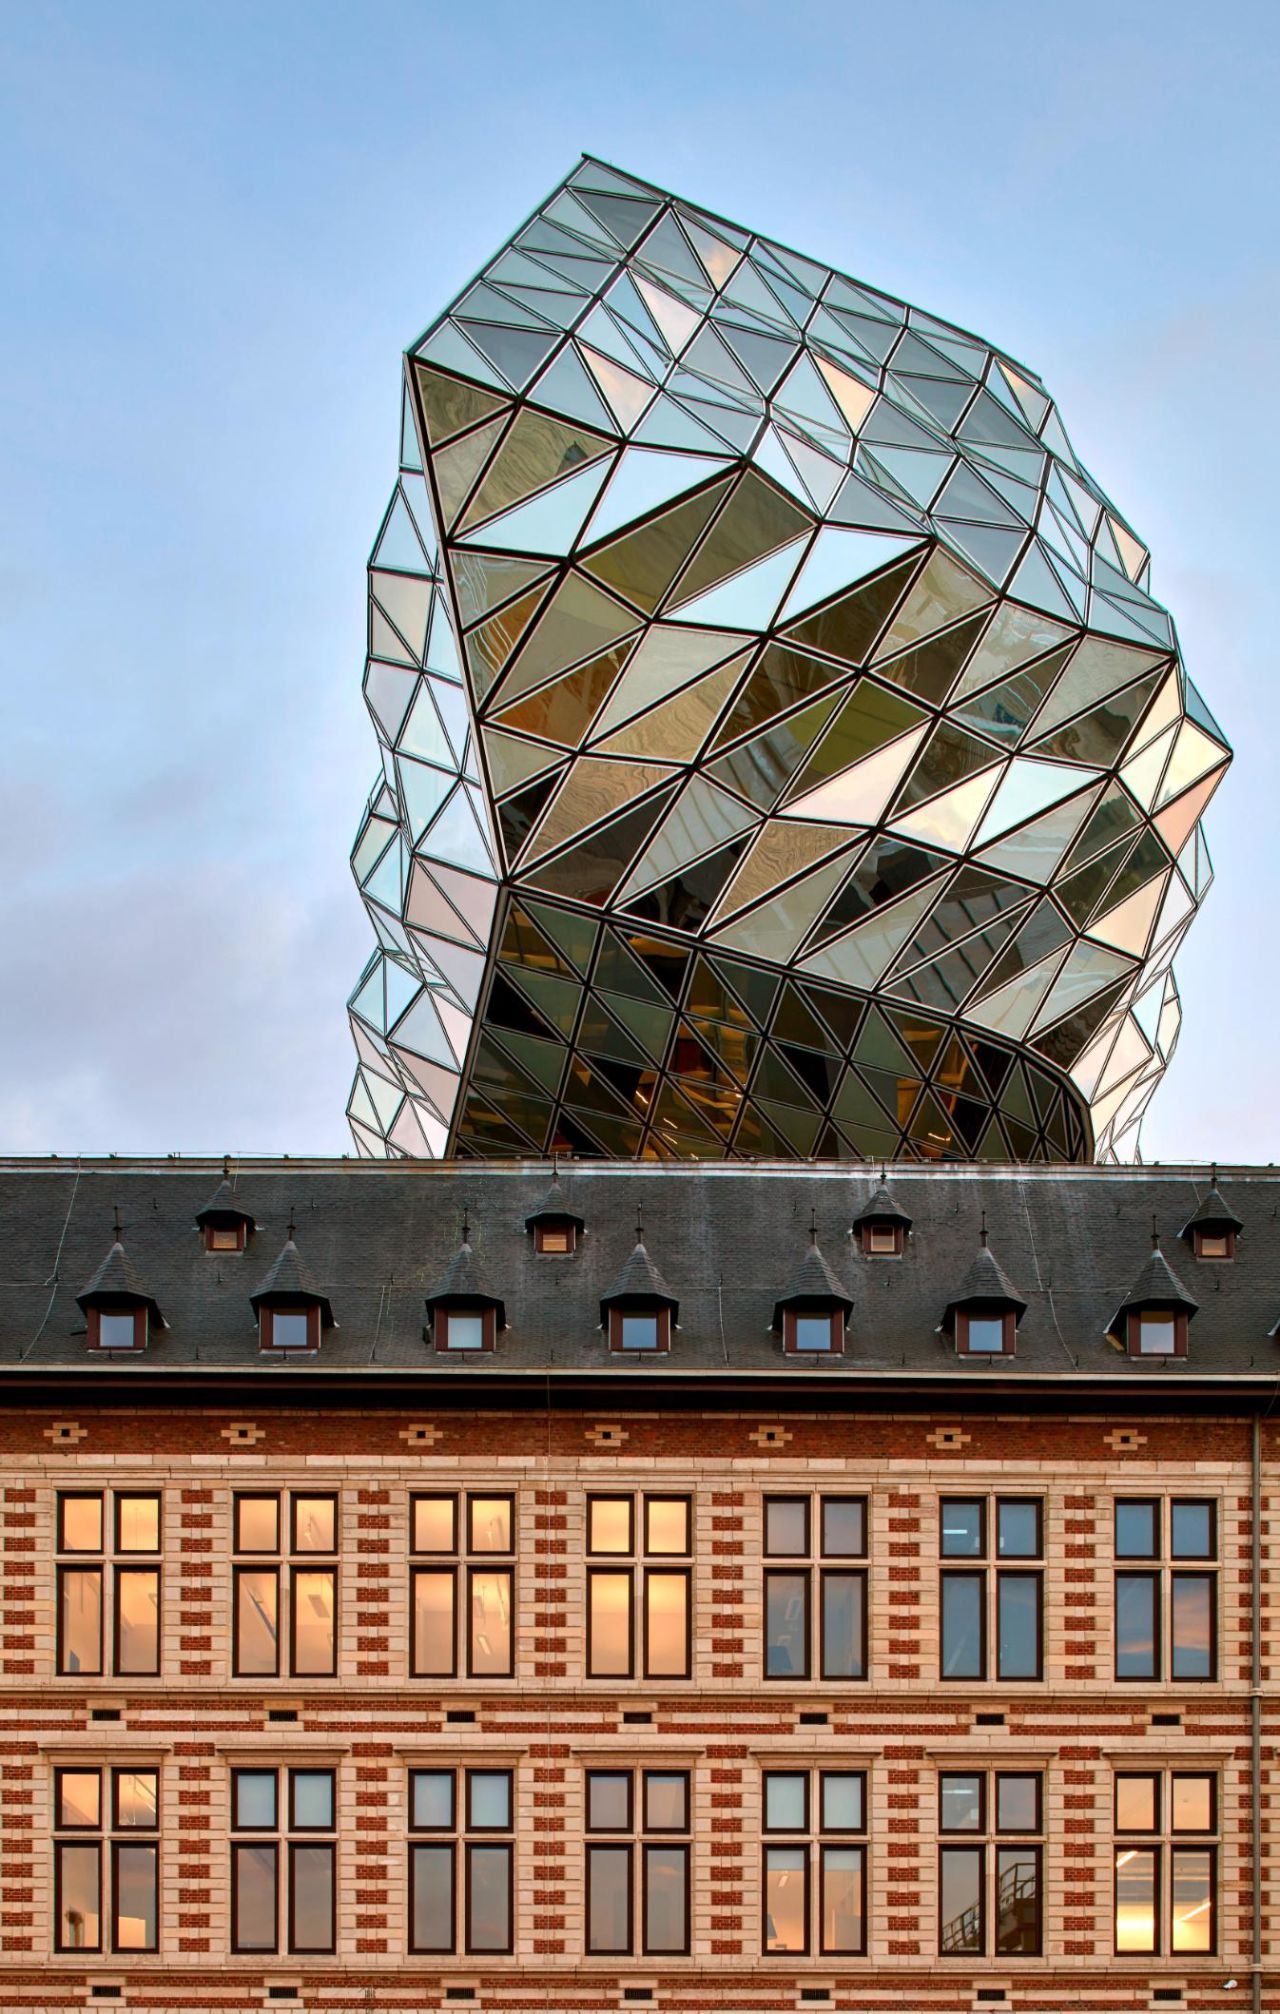 The building's 2,000 triangular glass panels nod to Antwerp's history as a diamond trading city.